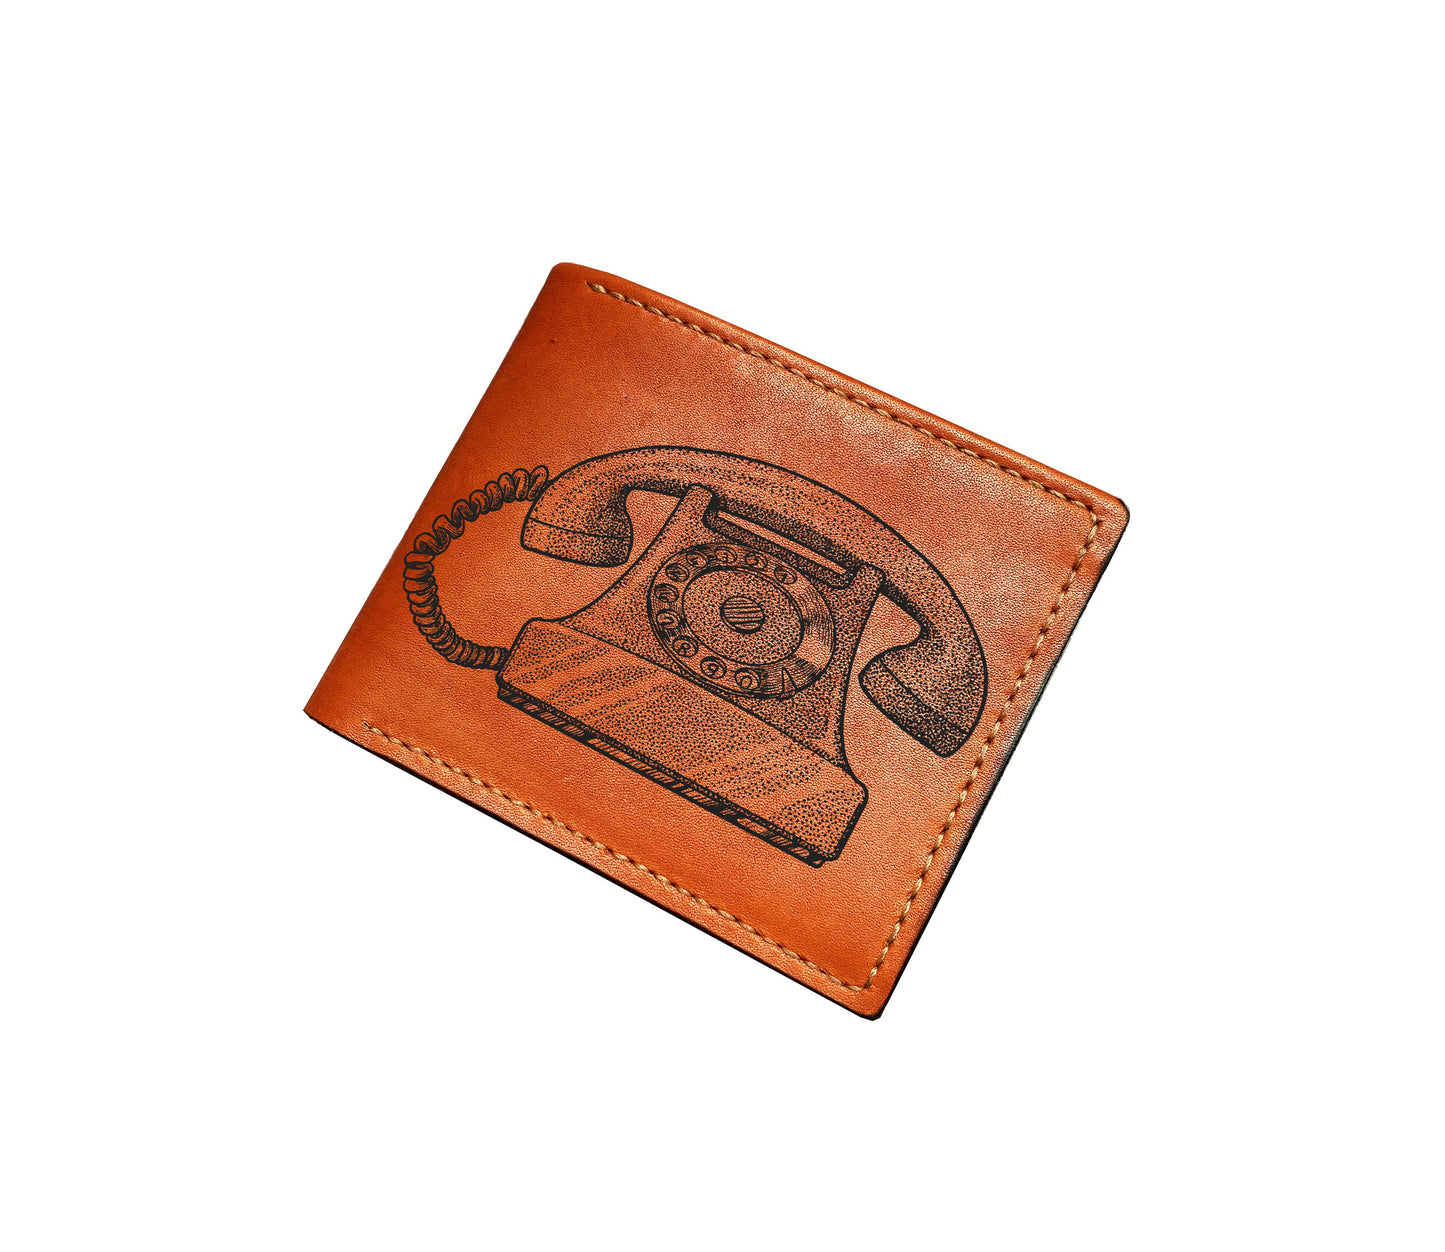 Mayan Corner - Vintage object retro style wallet, old typewritter drawing art wallet, customized leather handmade wallet, leather anniversary gift for him